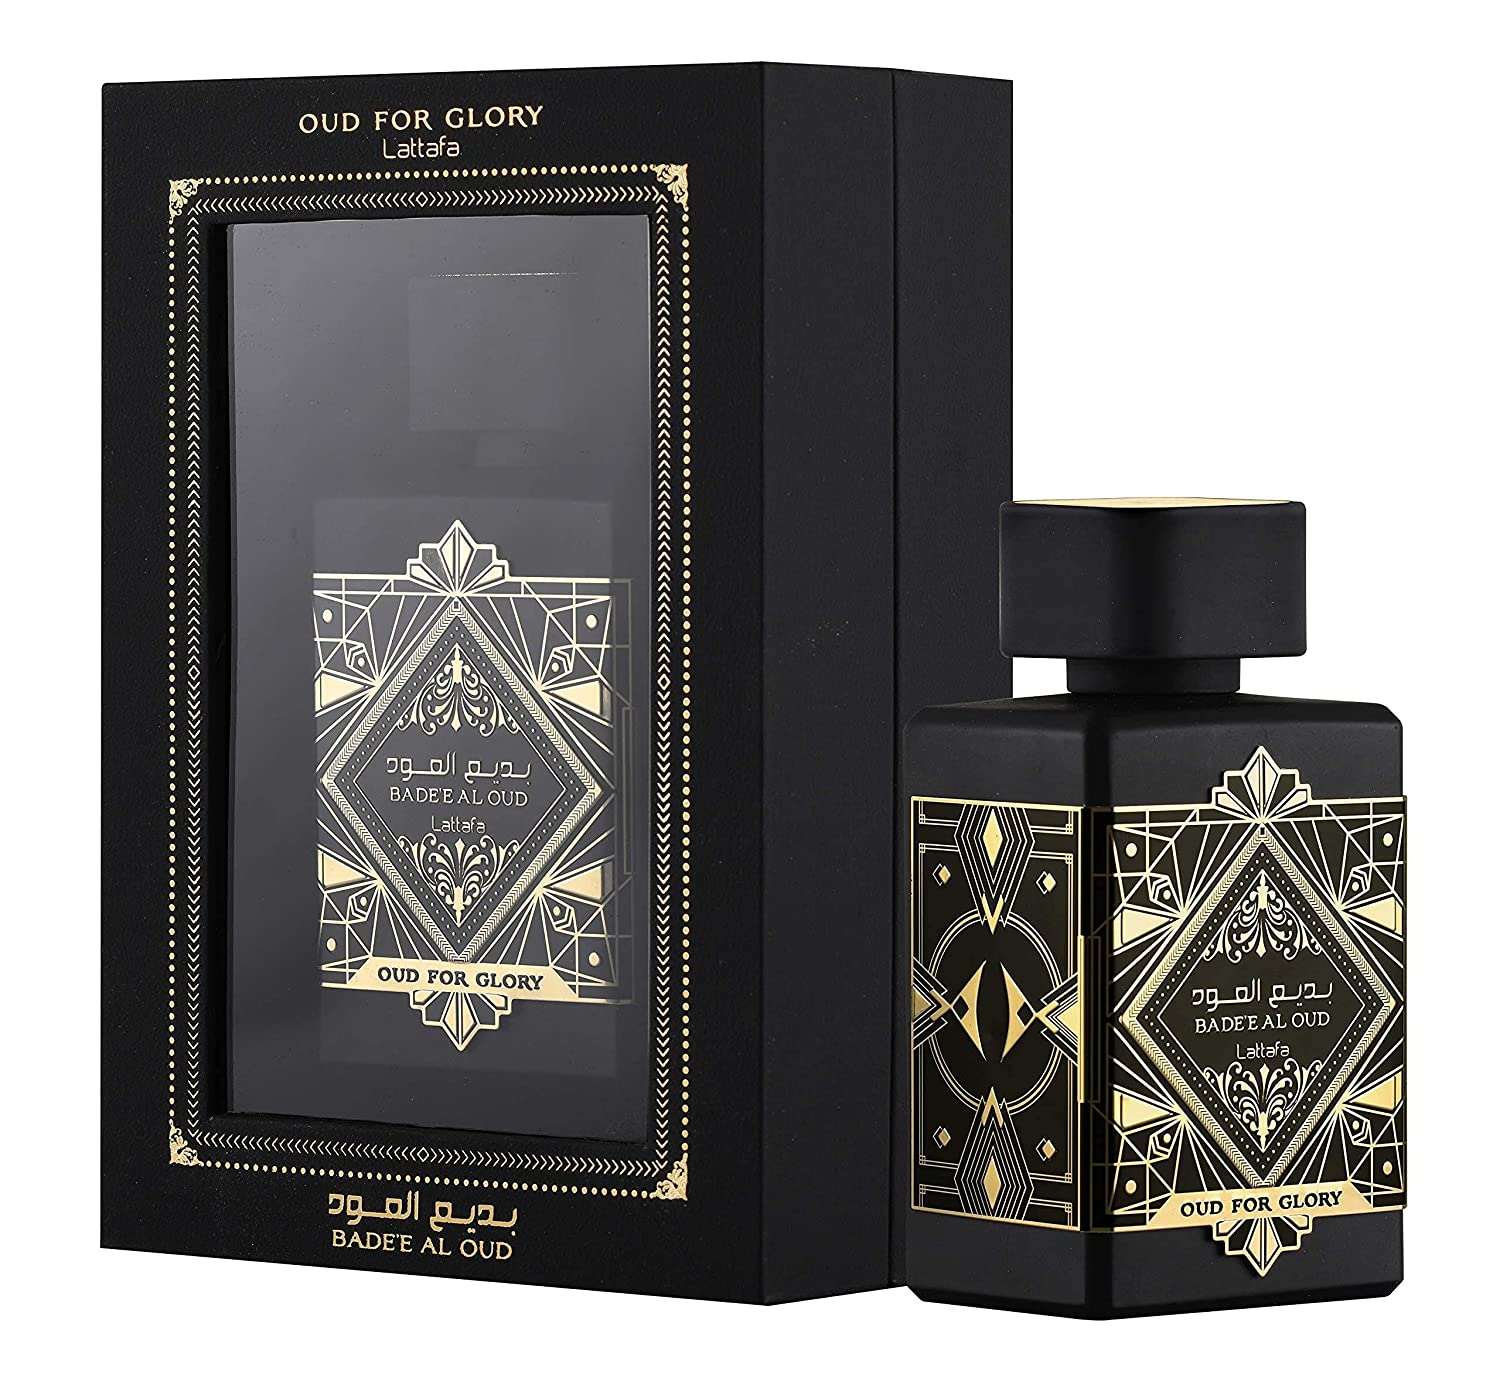 Bade'e Al Oud for Glory & Ejaazi Intensive Silver EDP-100ml(3.4 oz) with Magnetic Gift Box | by Lattafa Perfumes - Intense Oud